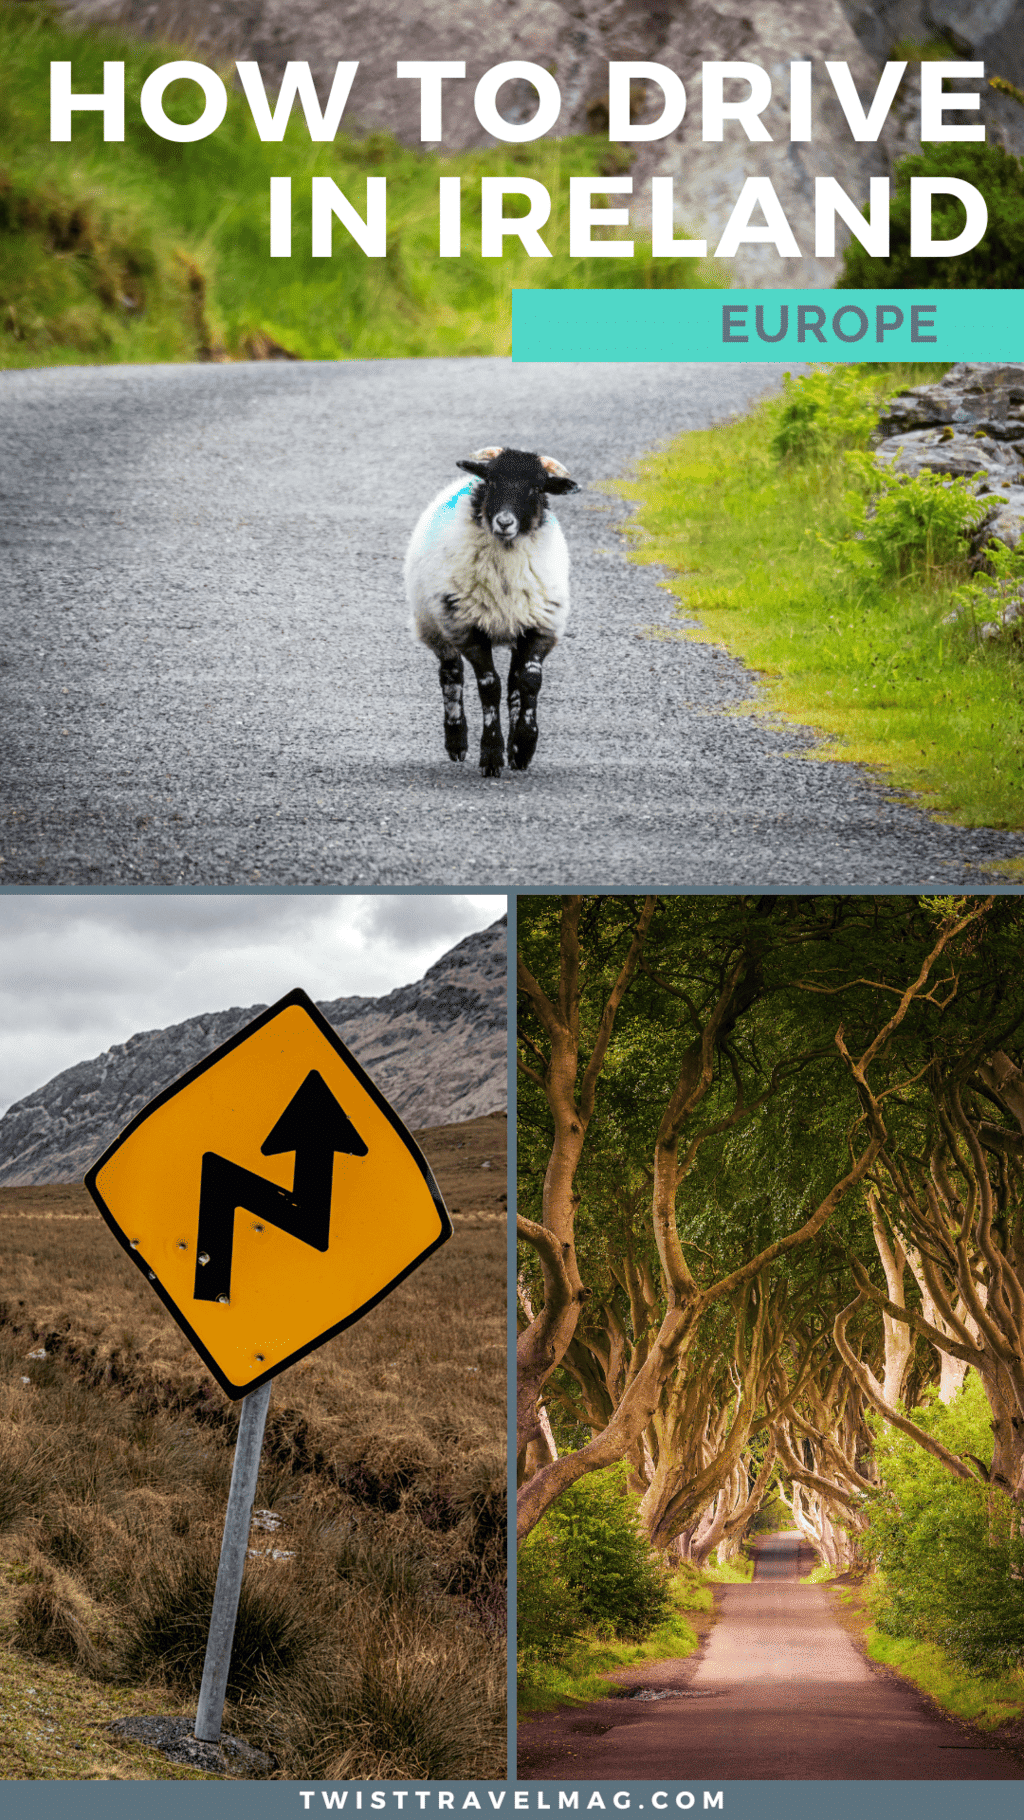 How to conquer driving in Ireland on the left side of the road